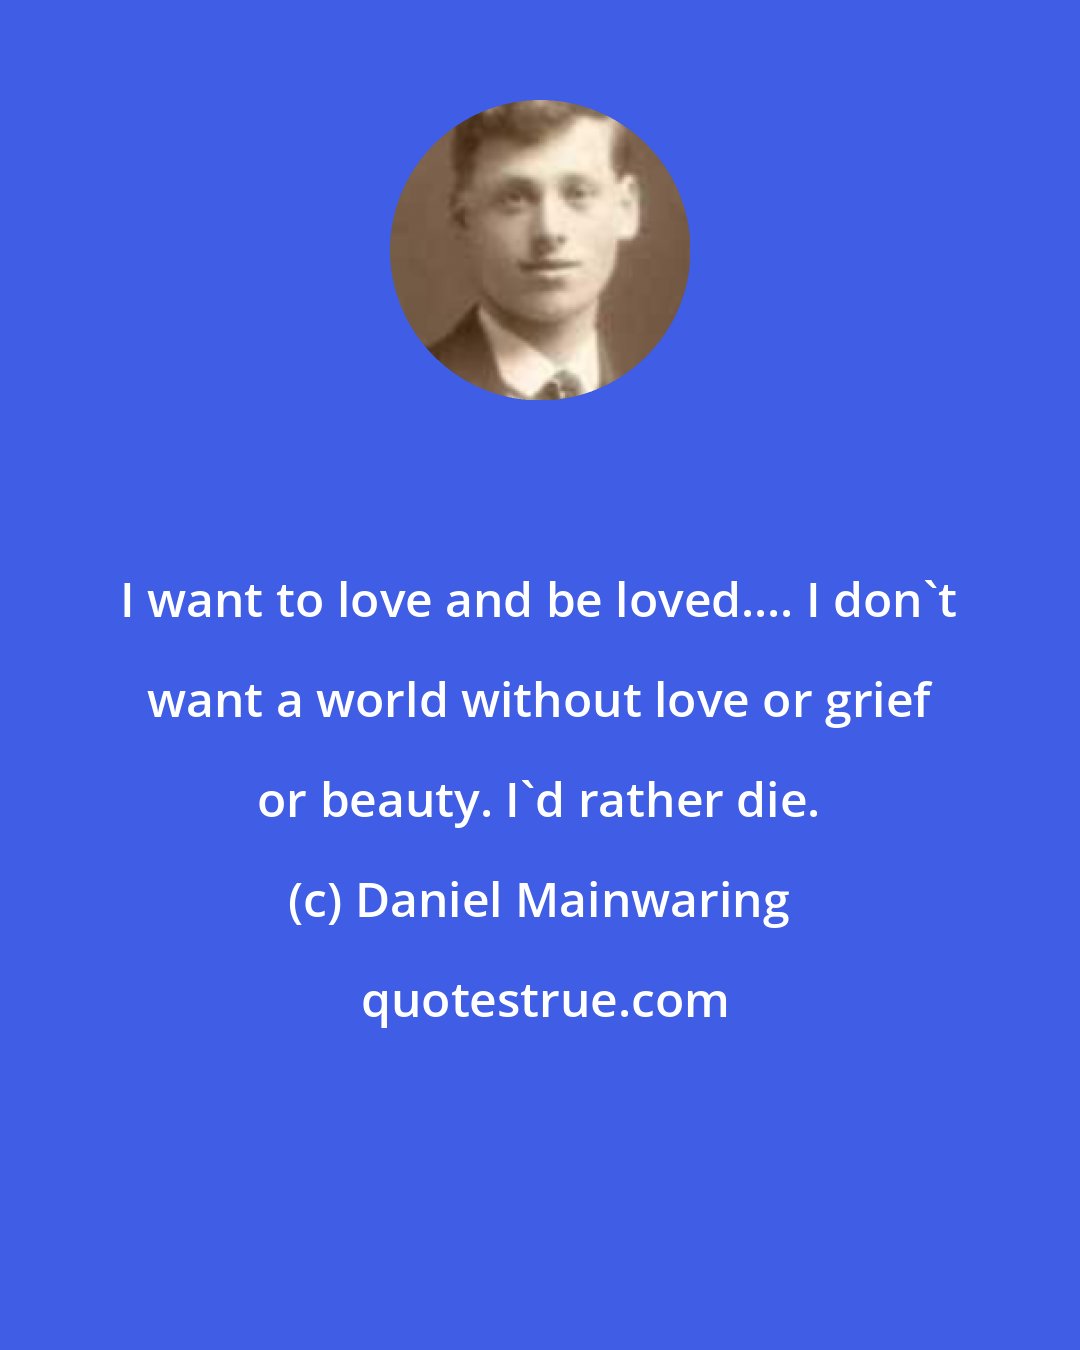 Daniel Mainwaring: I want to love and be loved.... I don't want a world without love or grief or beauty. I'd rather die.